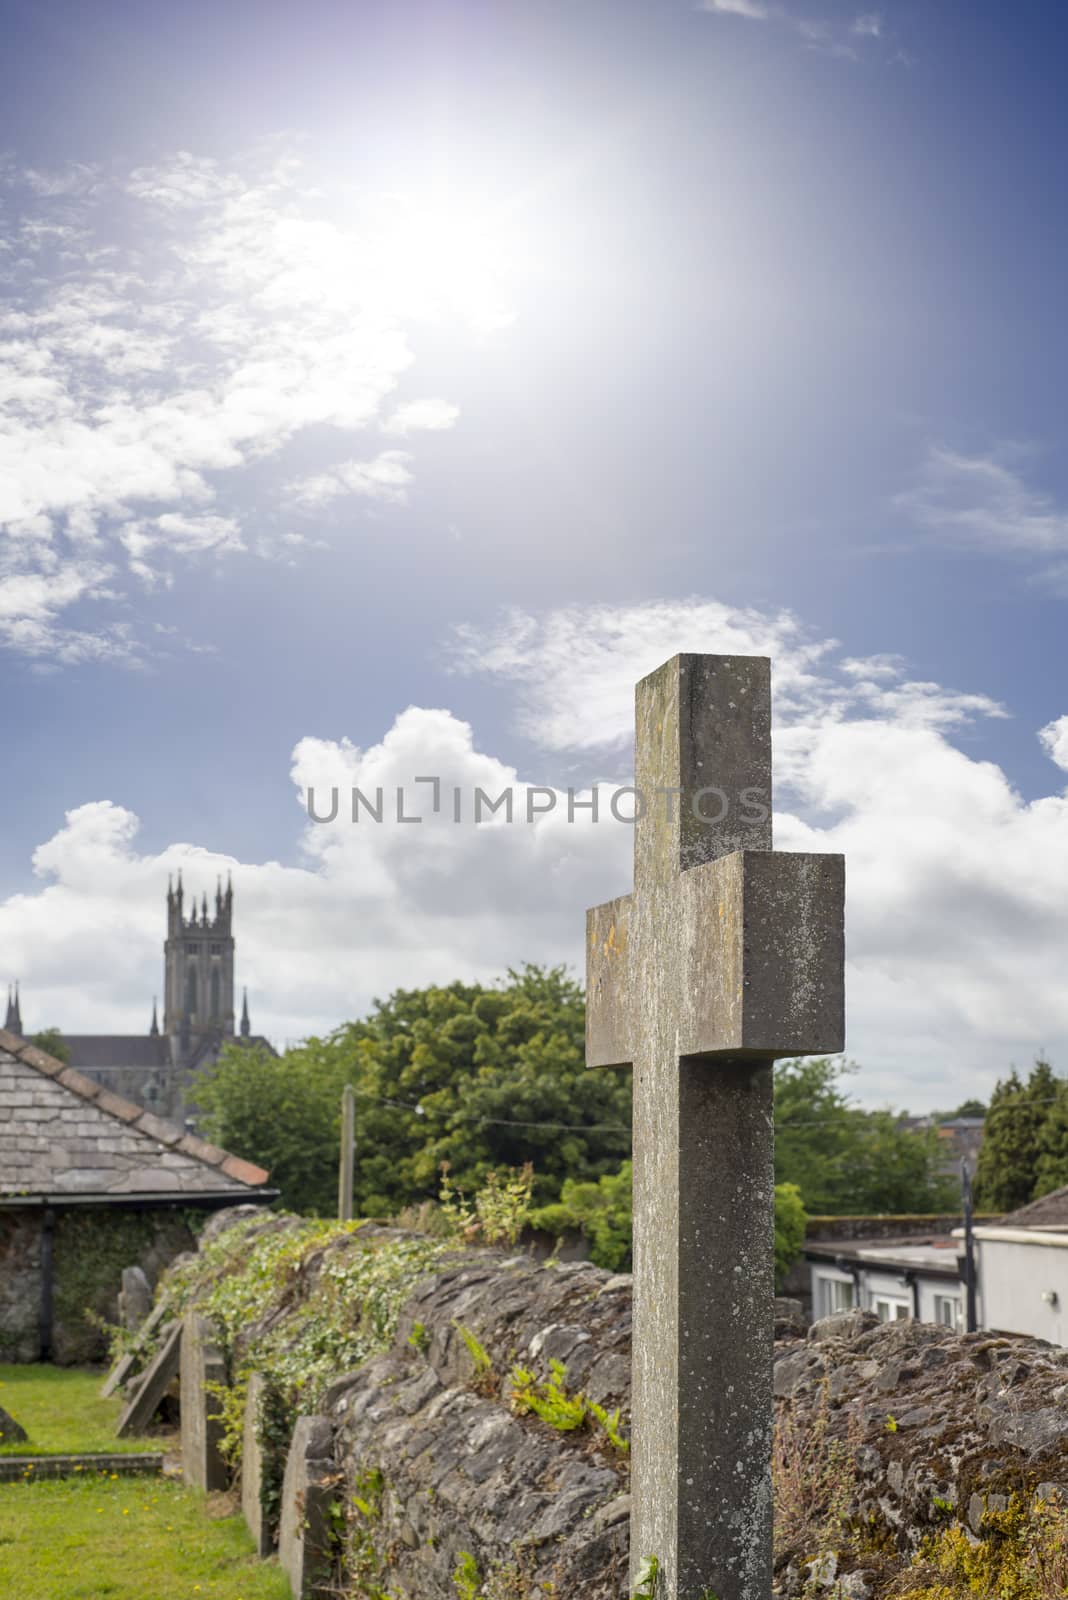 sunshine over cross at ancient graveyard by morrbyte